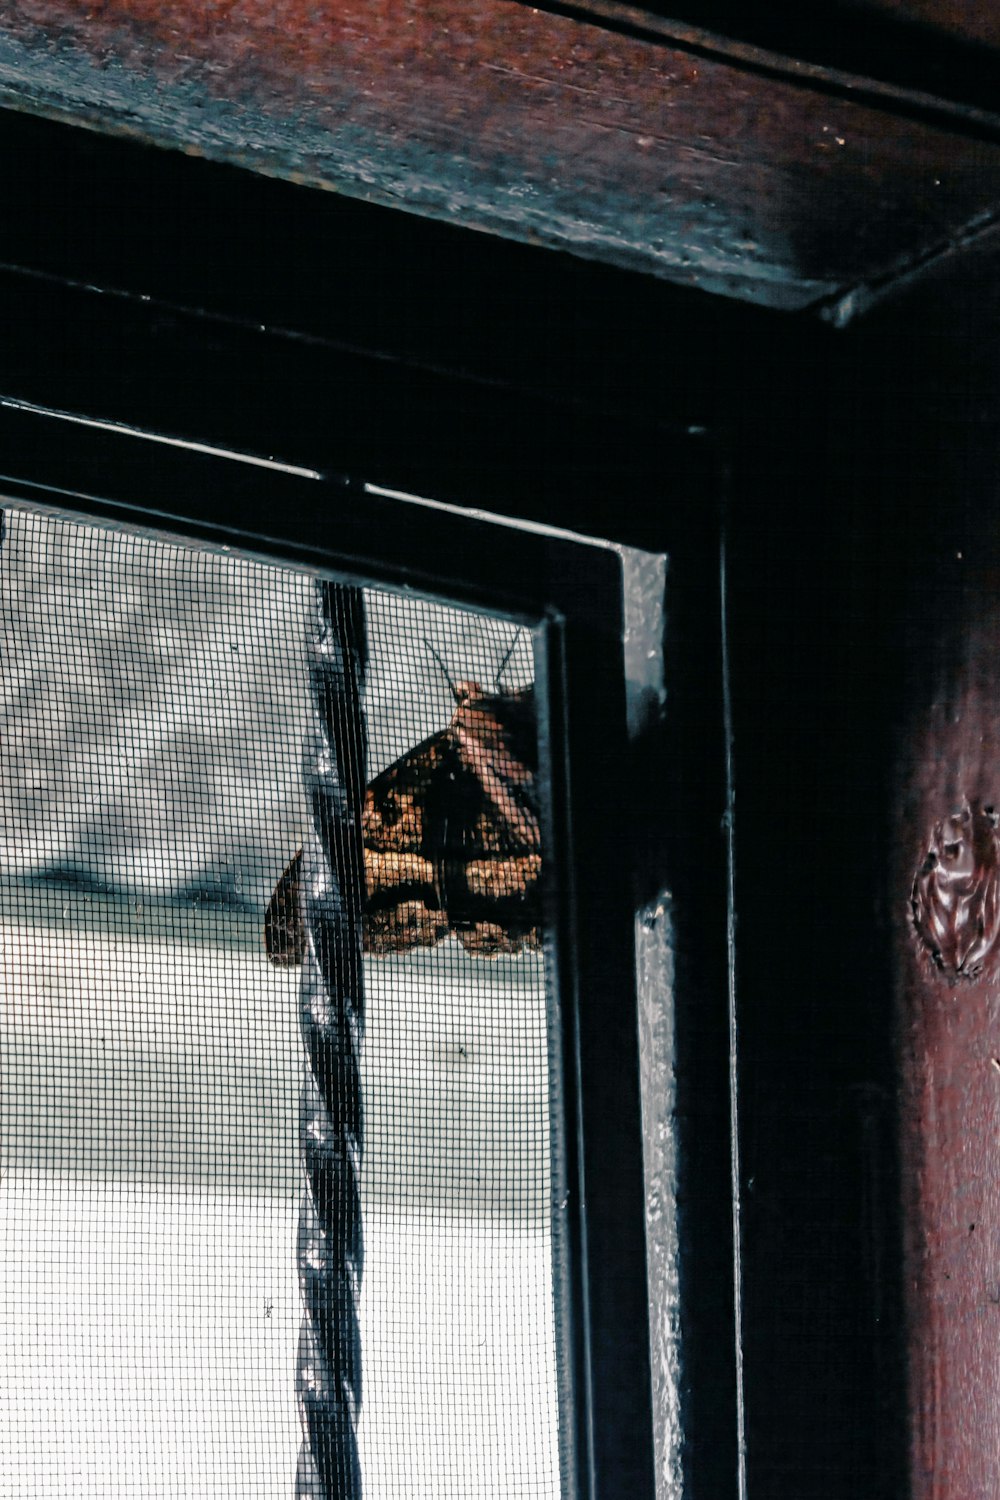 a moth that is sitting on a window sill